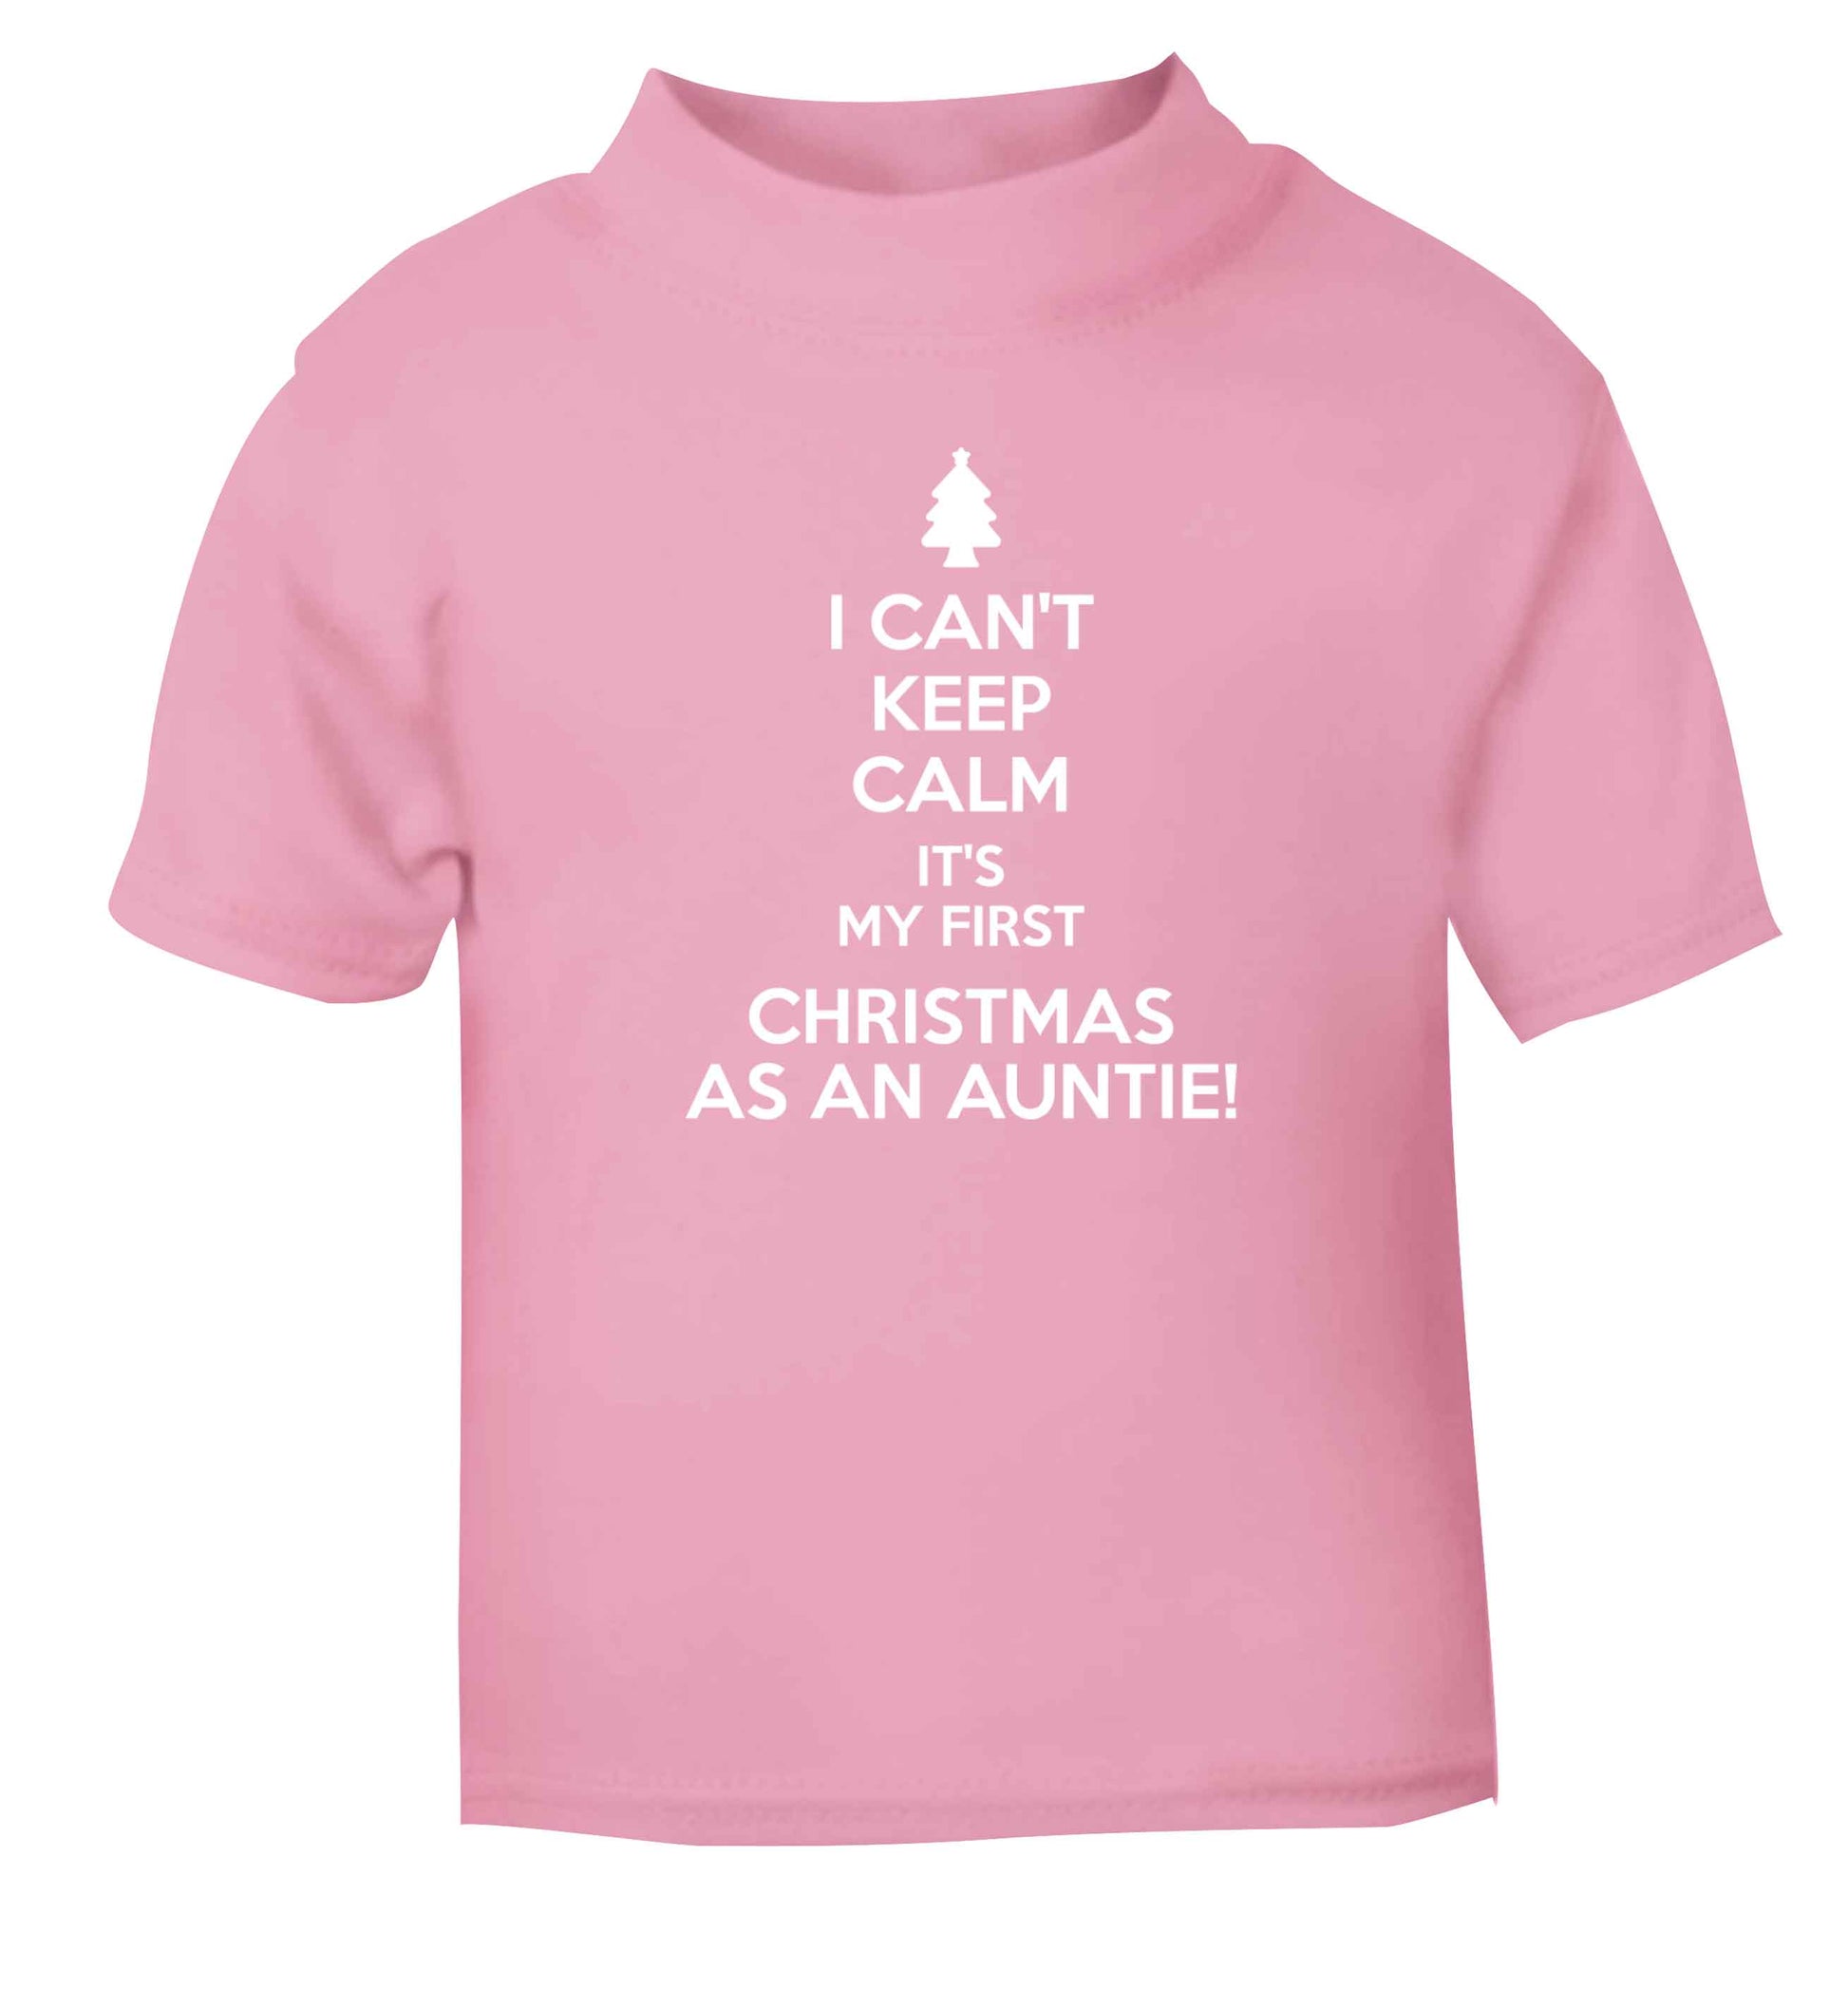 I can't keep calm it's my first Christmas as an auntie! light pink Baby Toddler Tshirt 2 Years